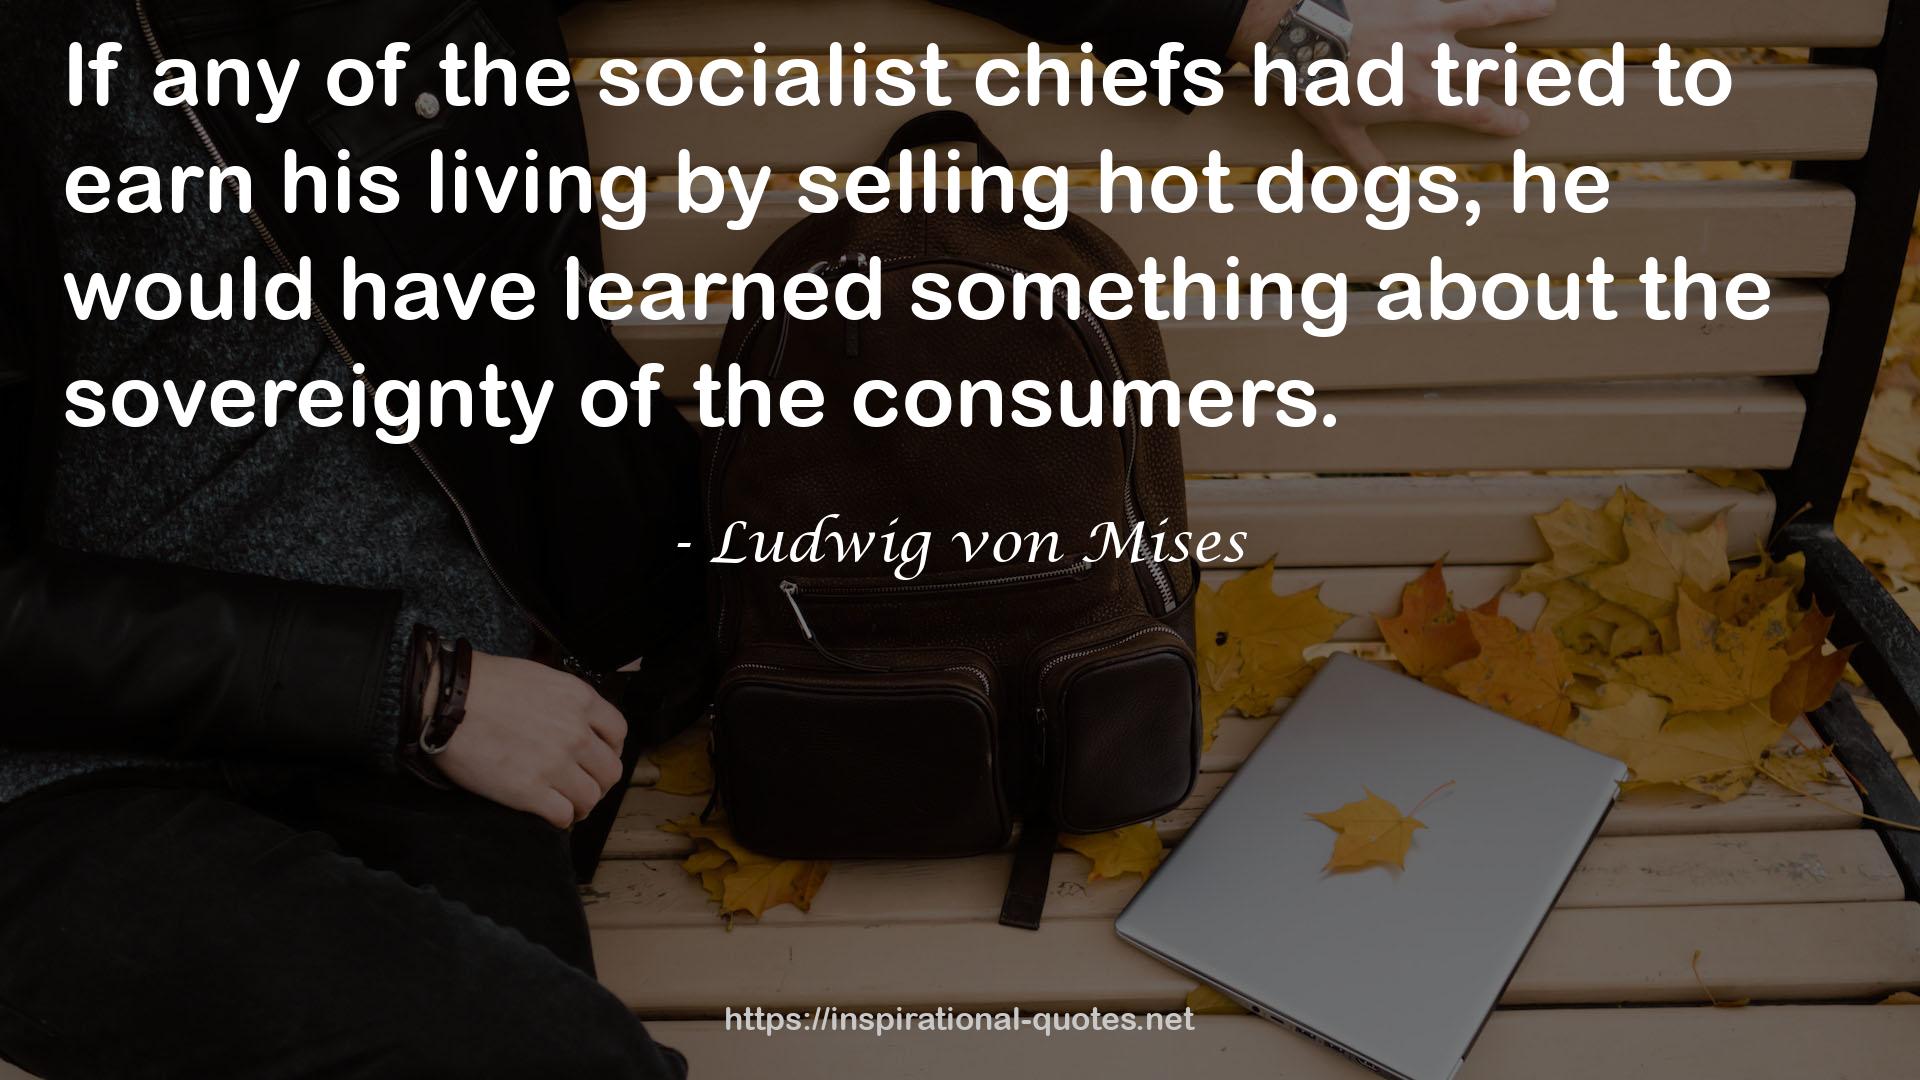 the socialist chiefs  QUOTES